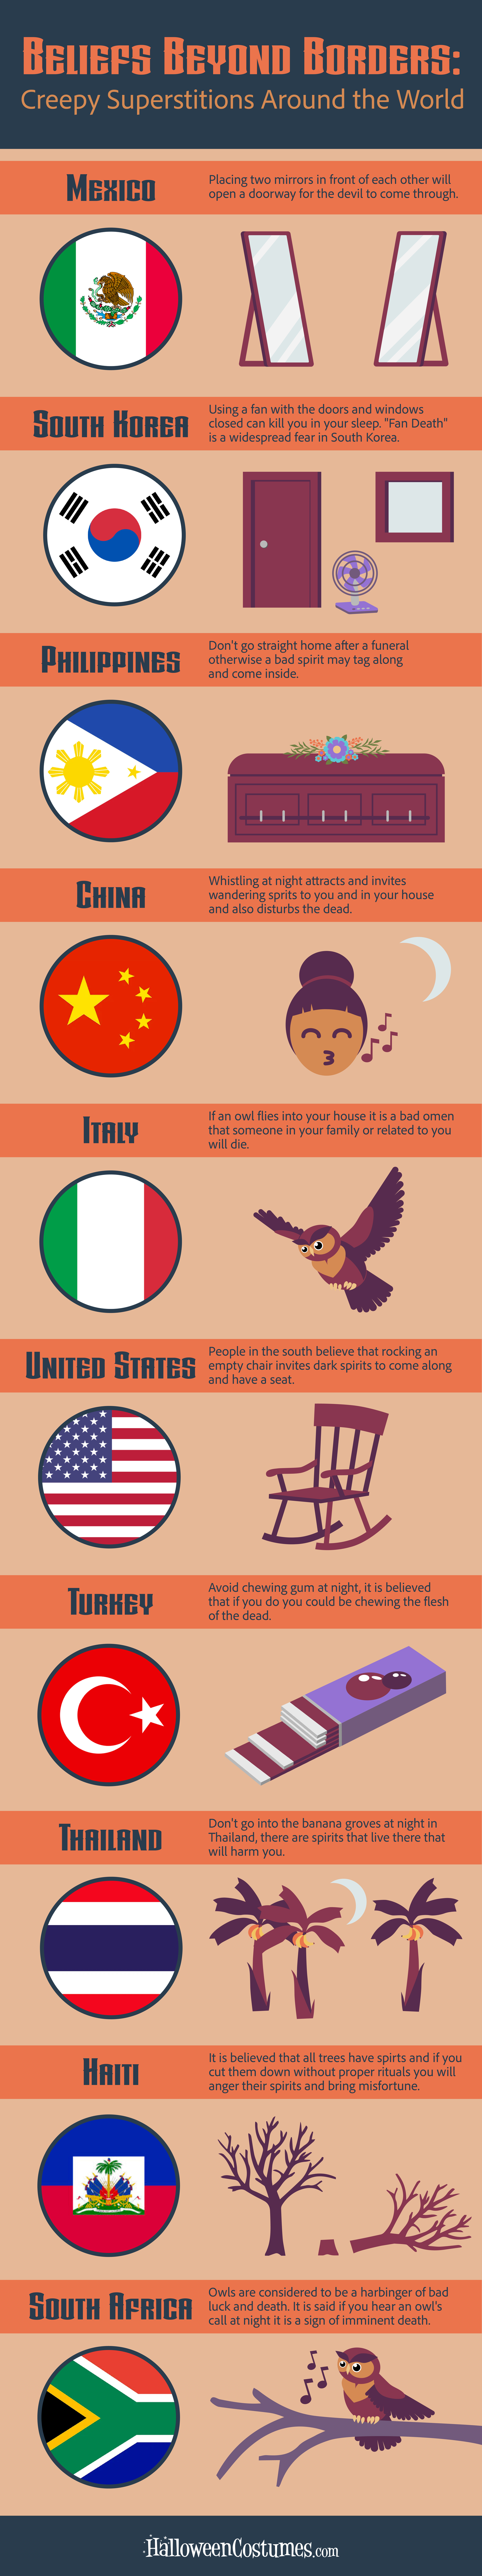 Creepy Superstitions Infographic